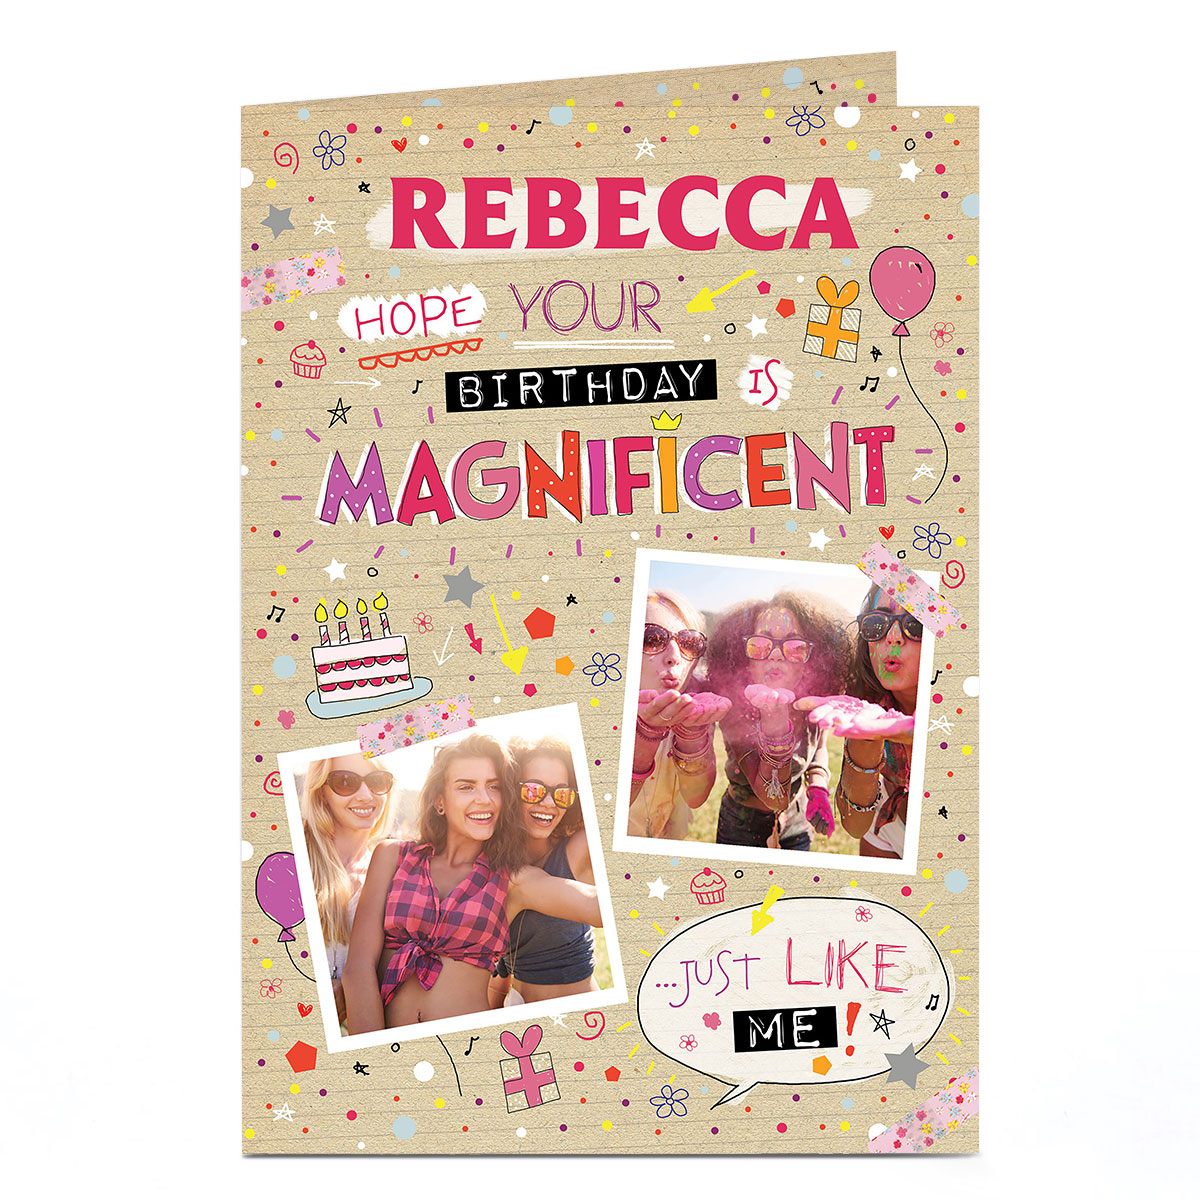 Personalised Photo Birthday Card - Magnificent Like Me